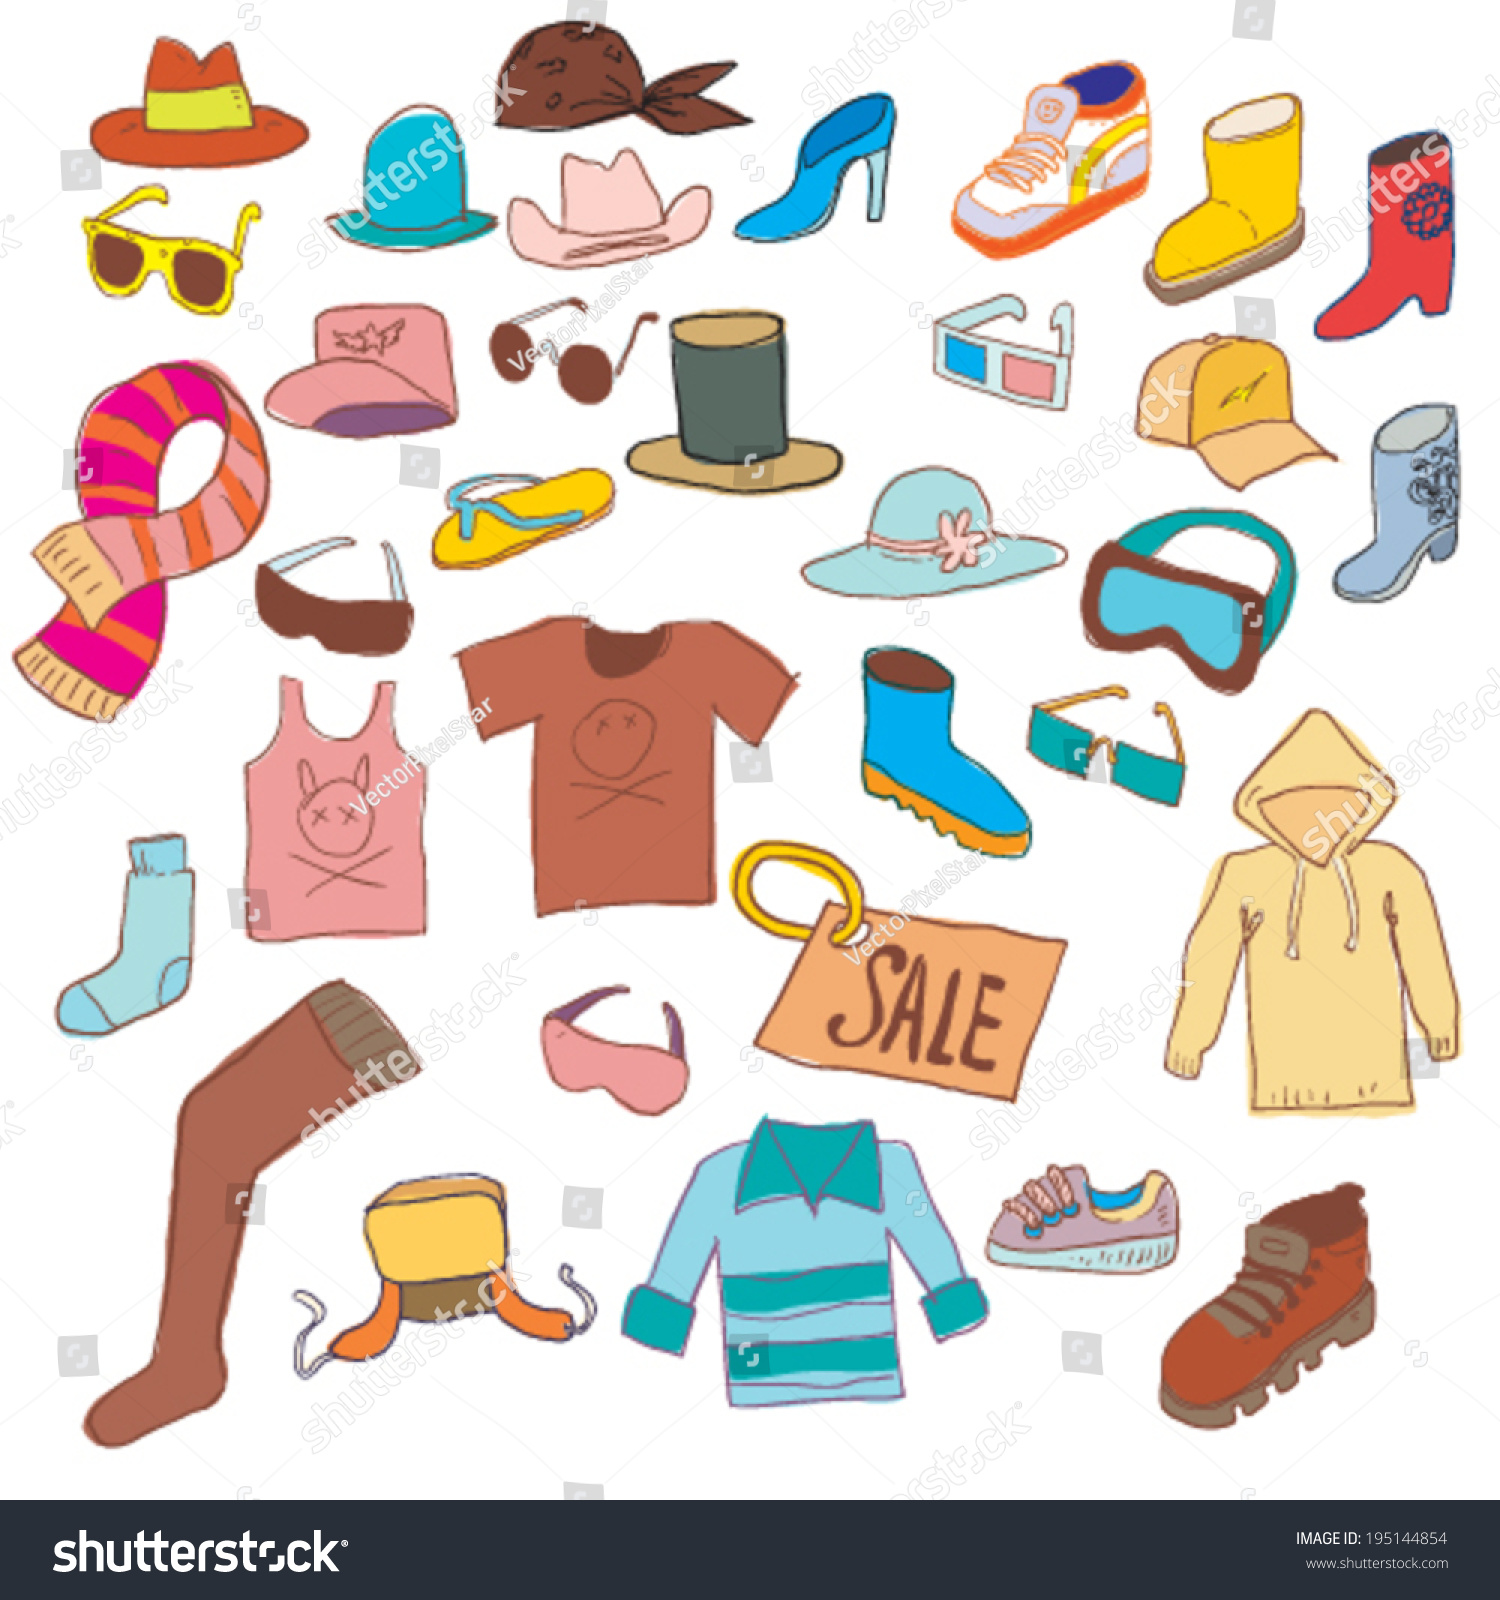 Cartoon Clothing And Accessories Stuff, Doodle Style Color Vector ...